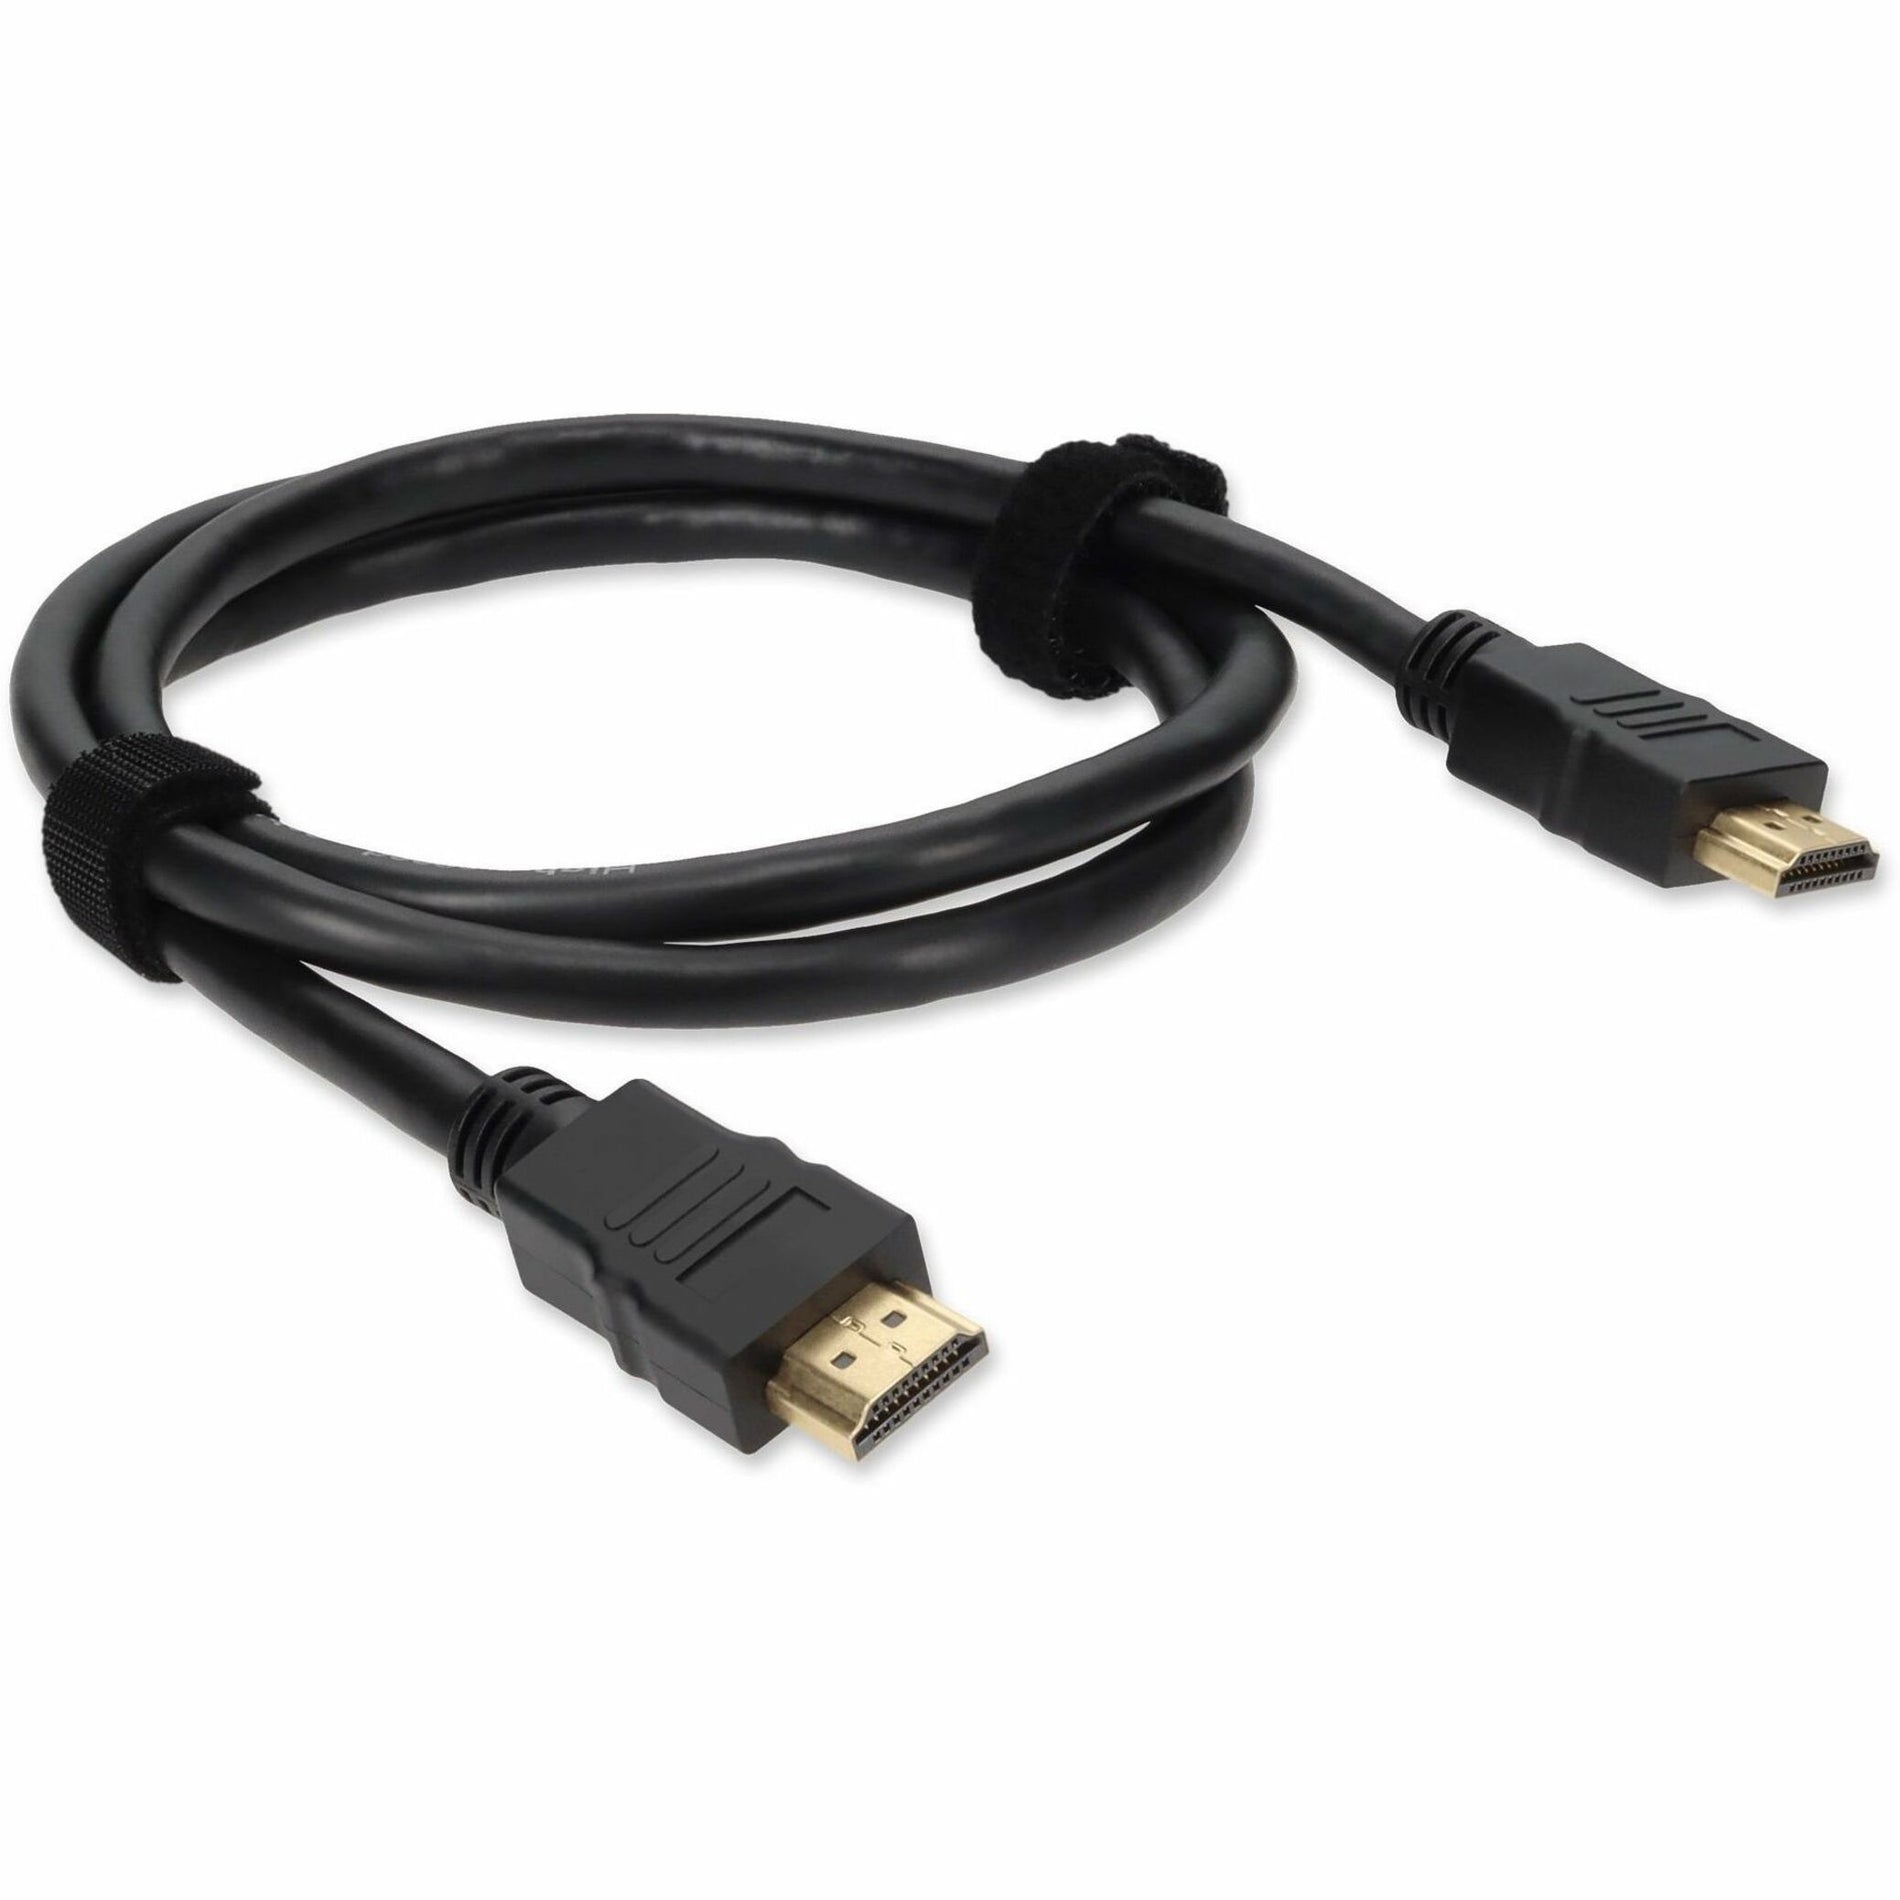 AddOn HDMIHSMM15 15ft HDMI 1.4 High Speed Cable w/Ethernet - Male to Male, 3 Year Warranty, United States